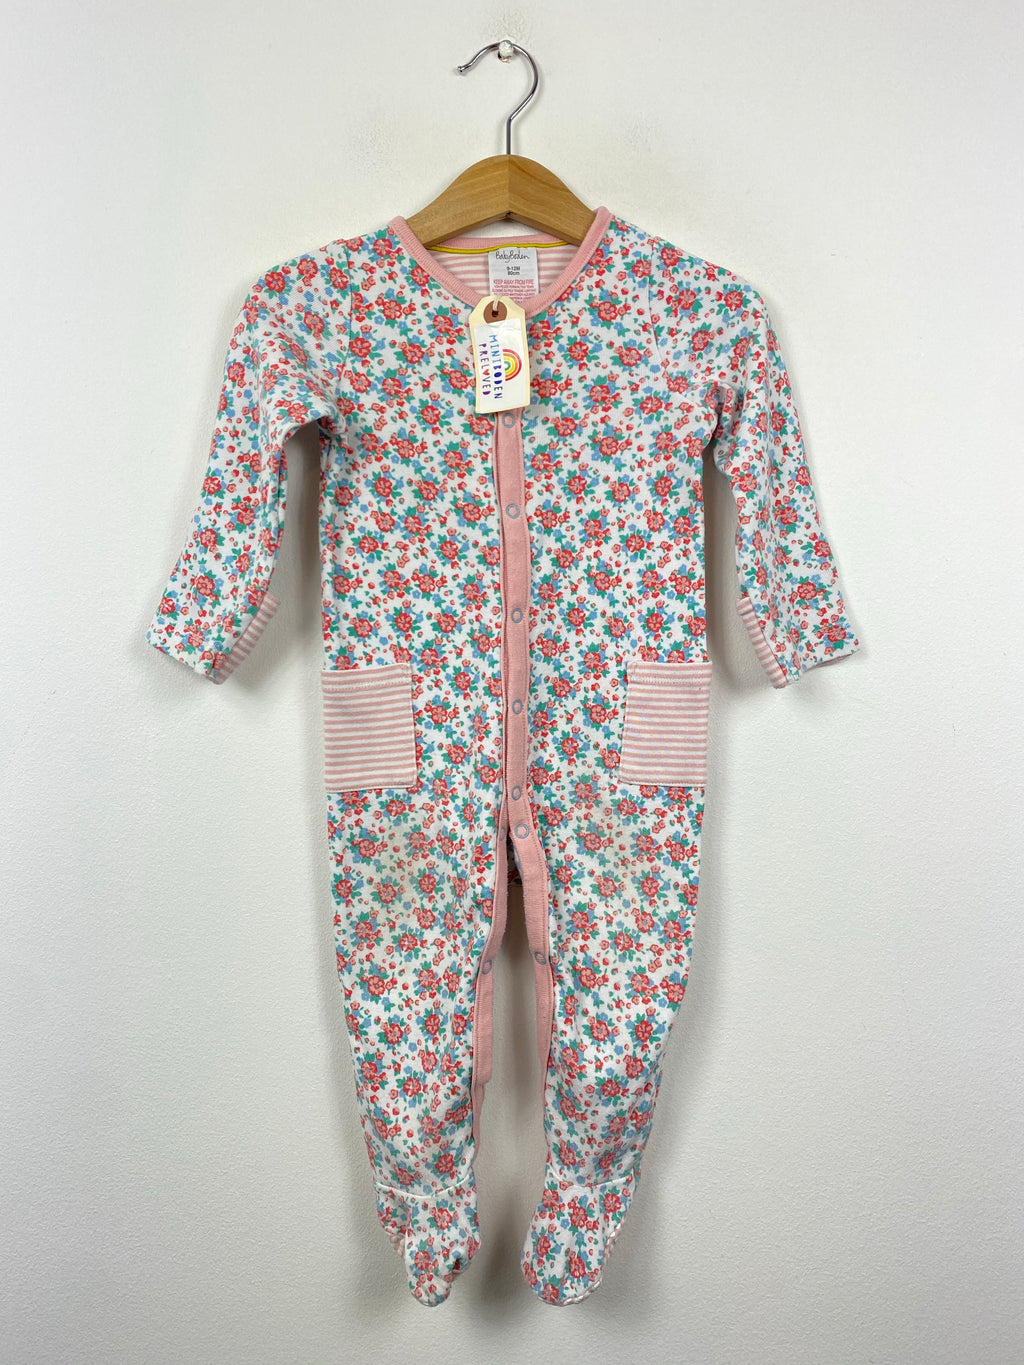 Pretty Floral Sleepsuit (9-12 Months)